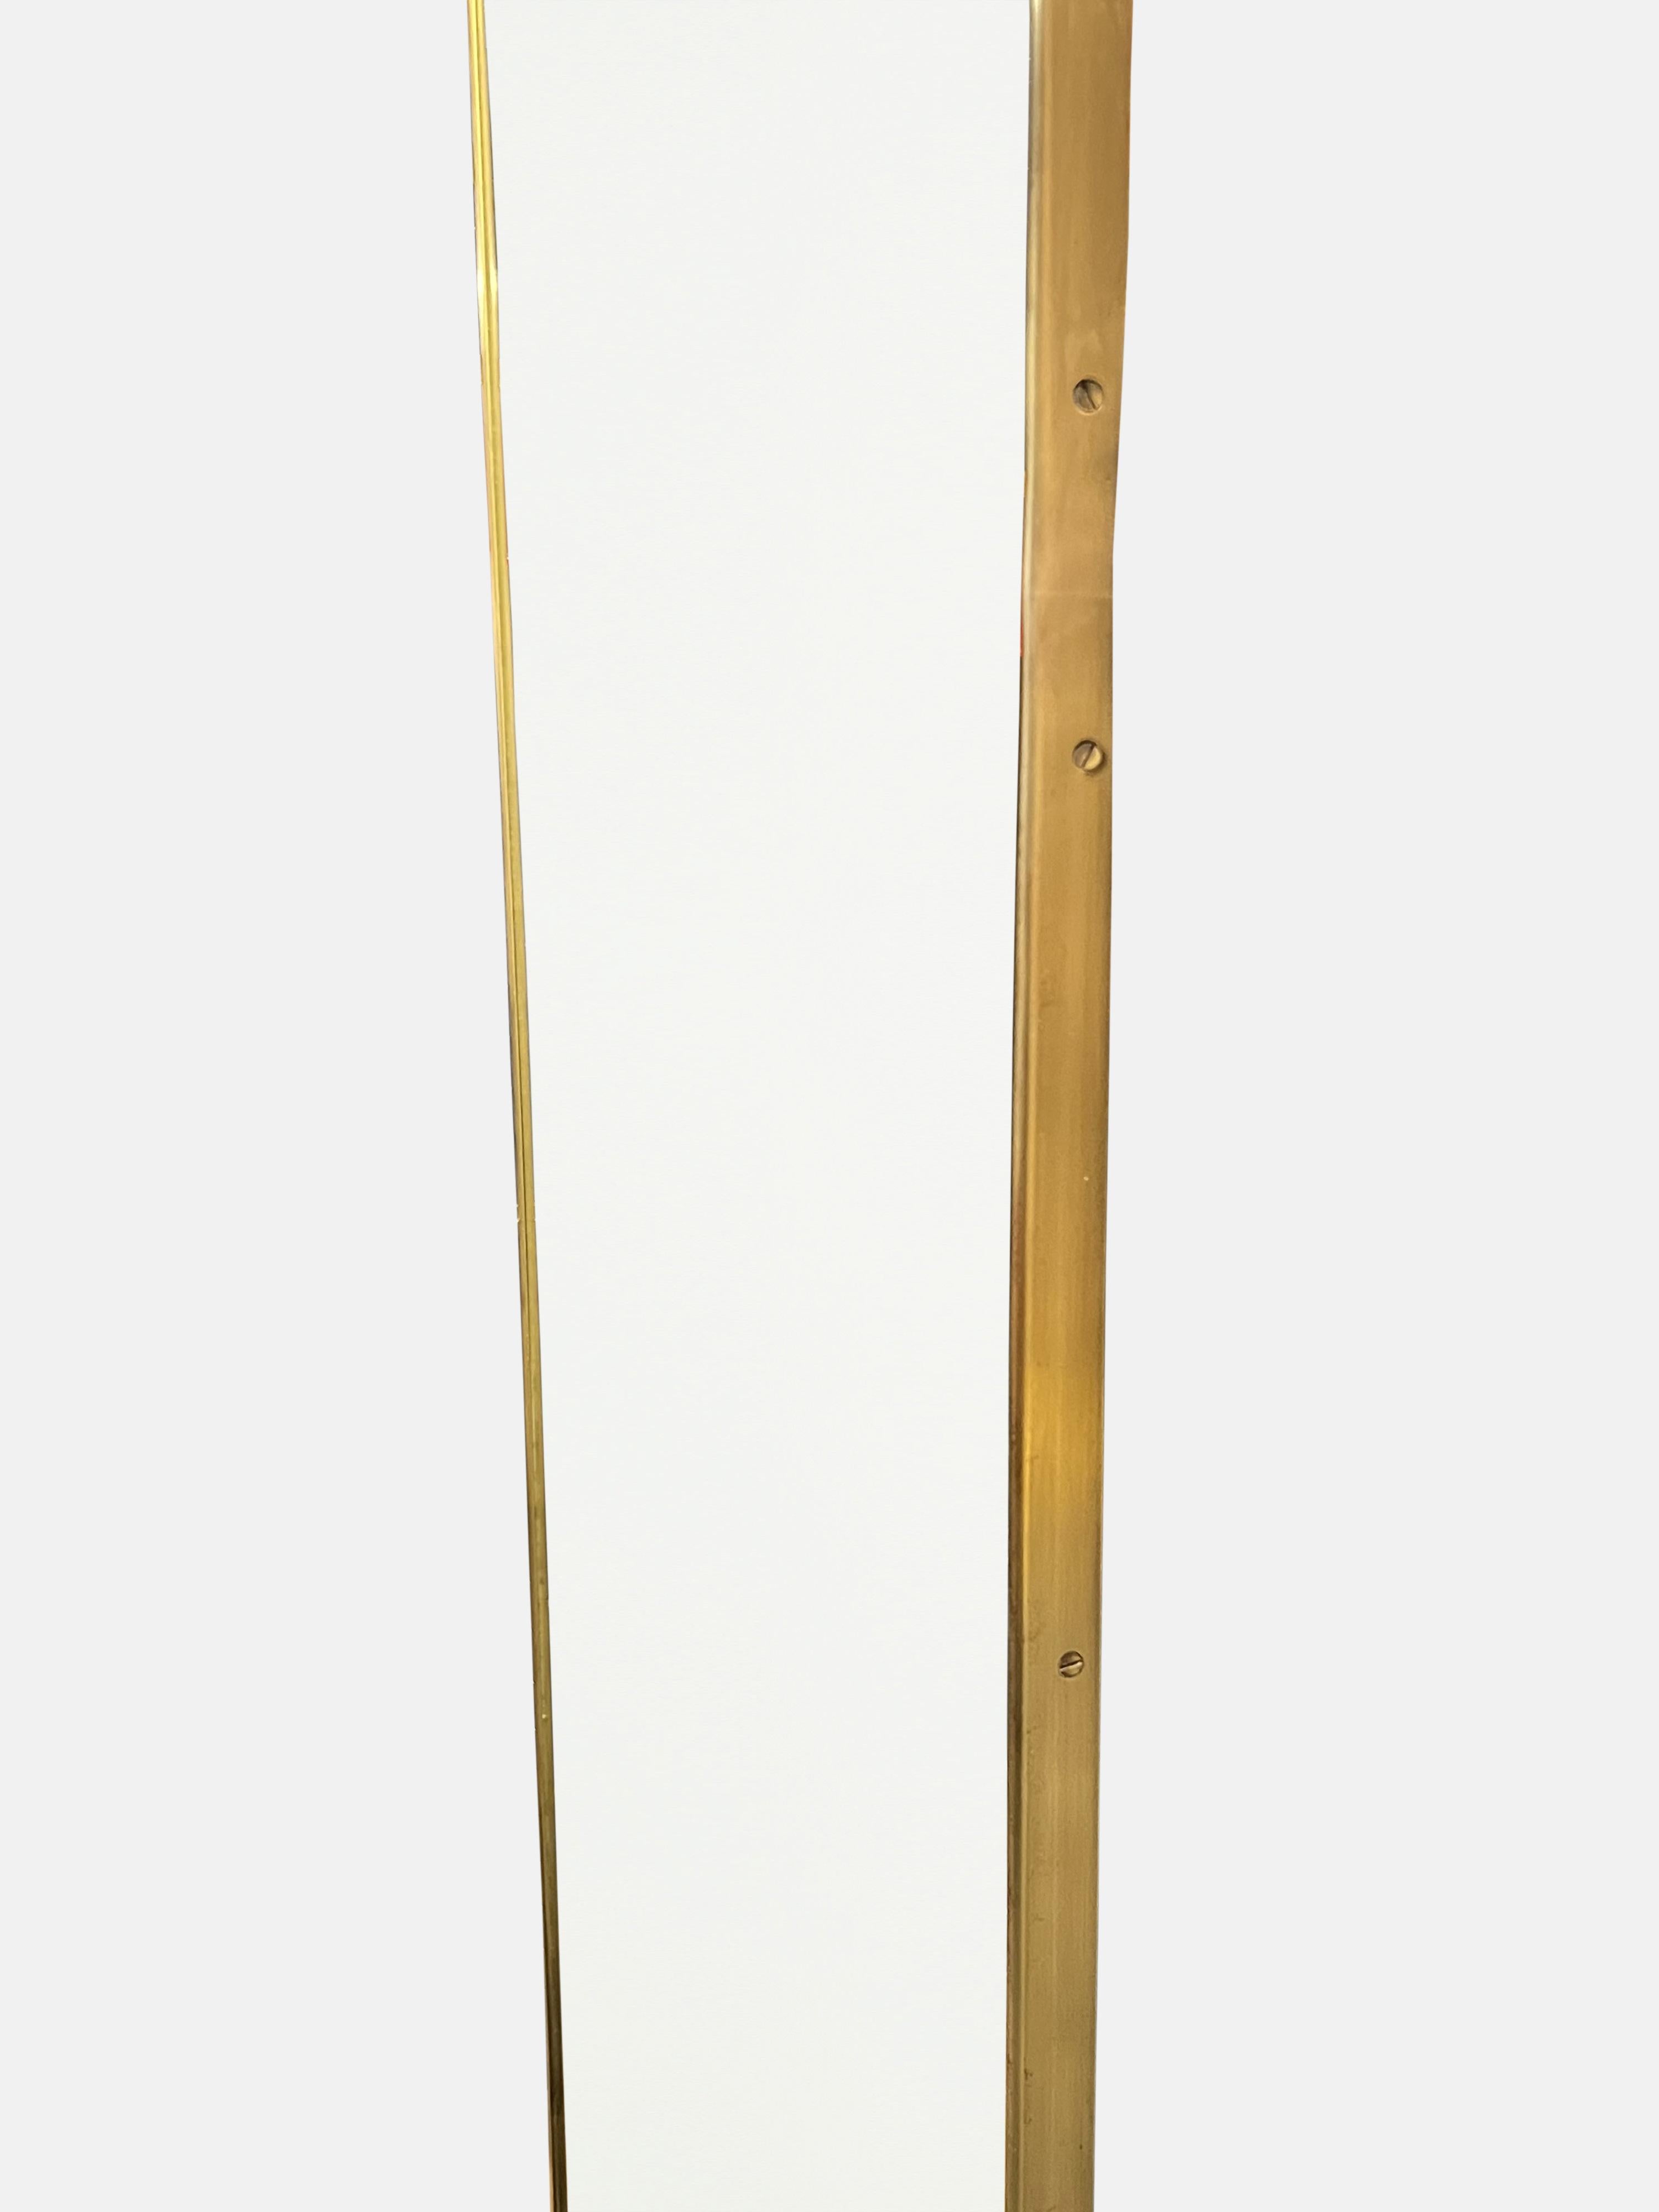 1950s Italian Modernist Pair of Grand Scale Brass Wall Mirrors For Sale 5